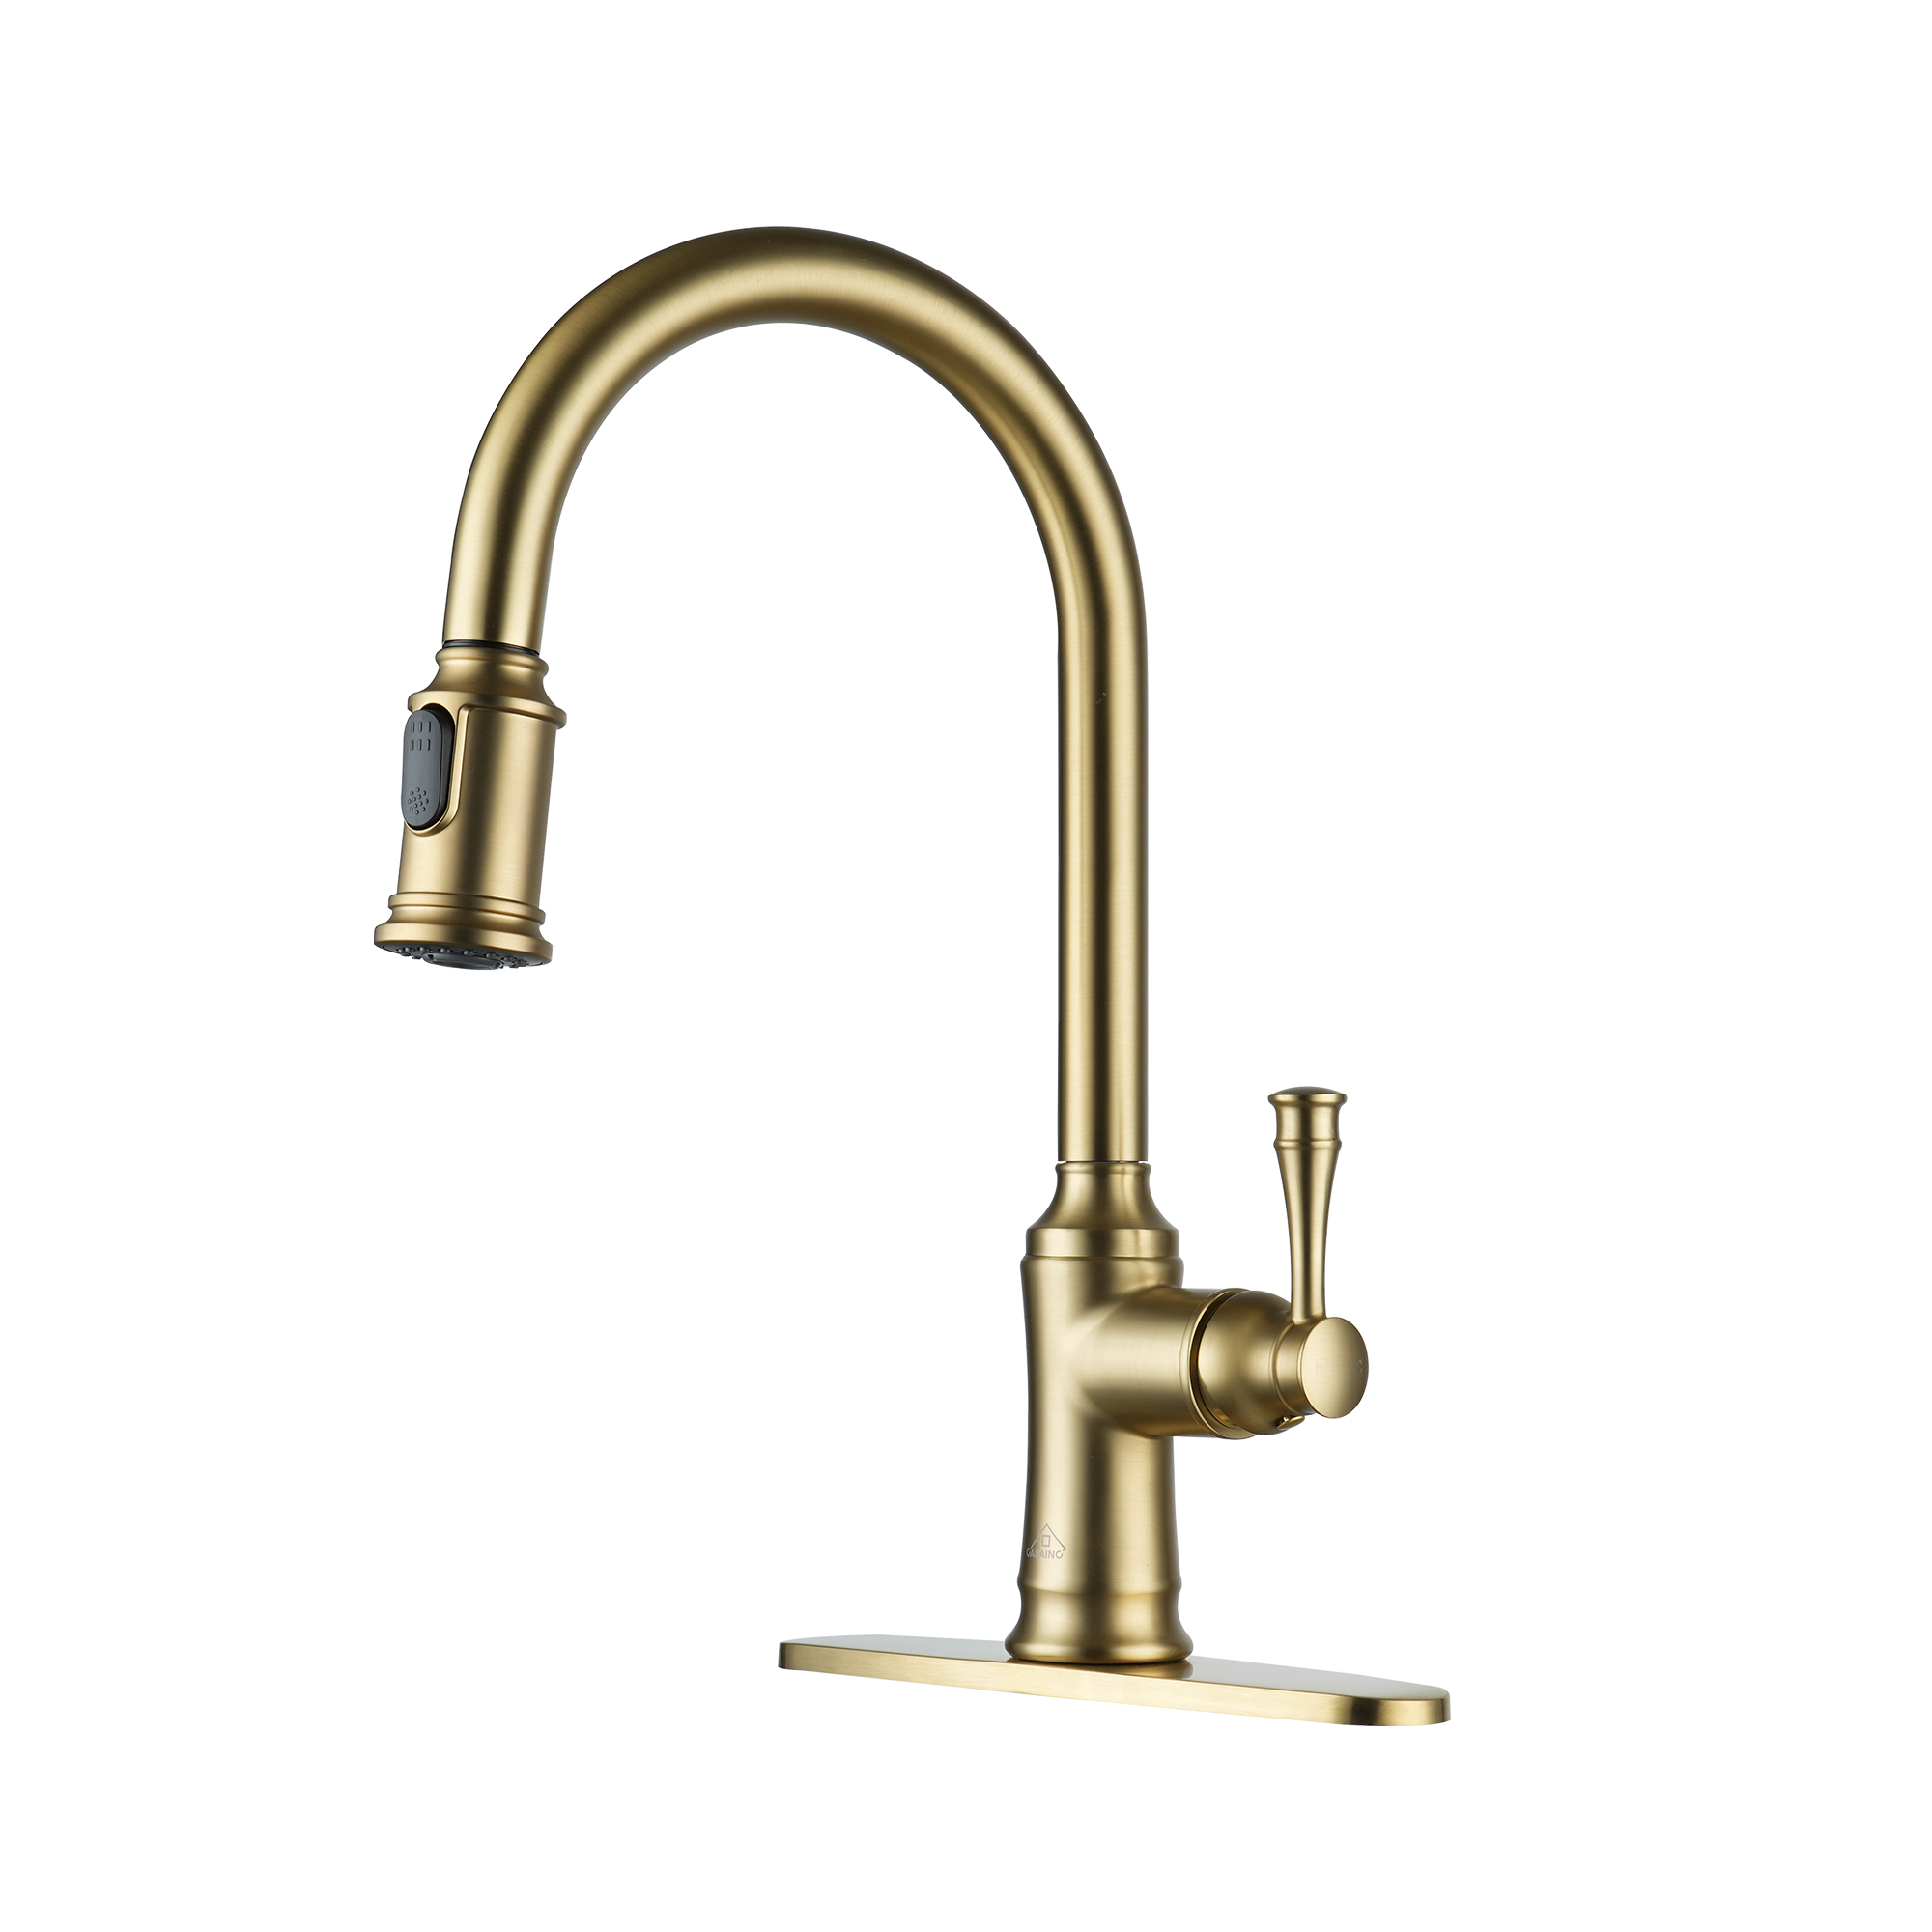 CASAINC Single-Handle Kitchen Faucet with  Pull-Out Sprayer